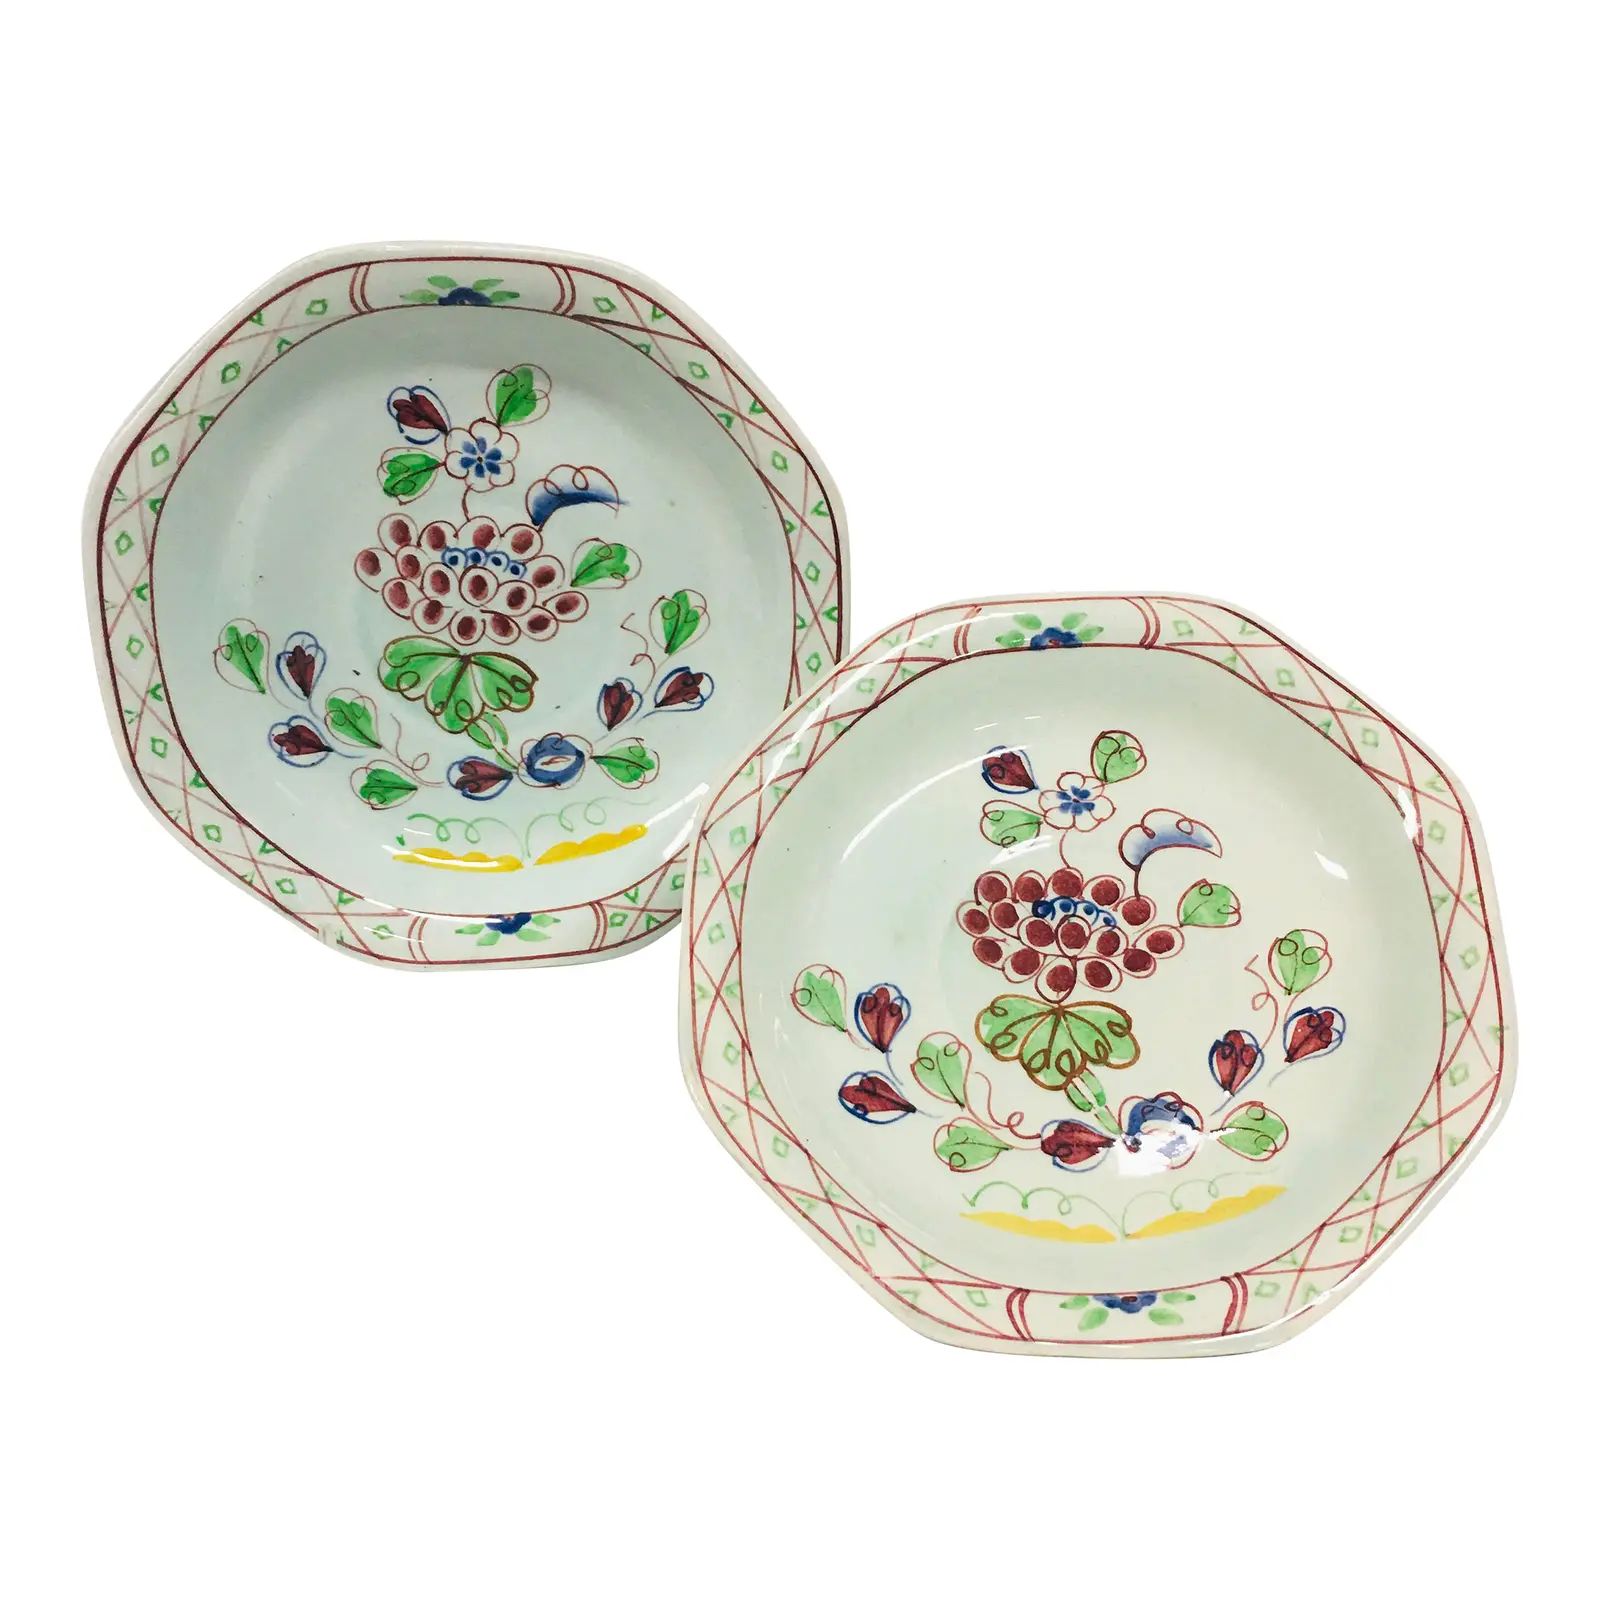 Antique Hand-Painted Calyx Ware Floral Plates- Set of 2 | Chairish